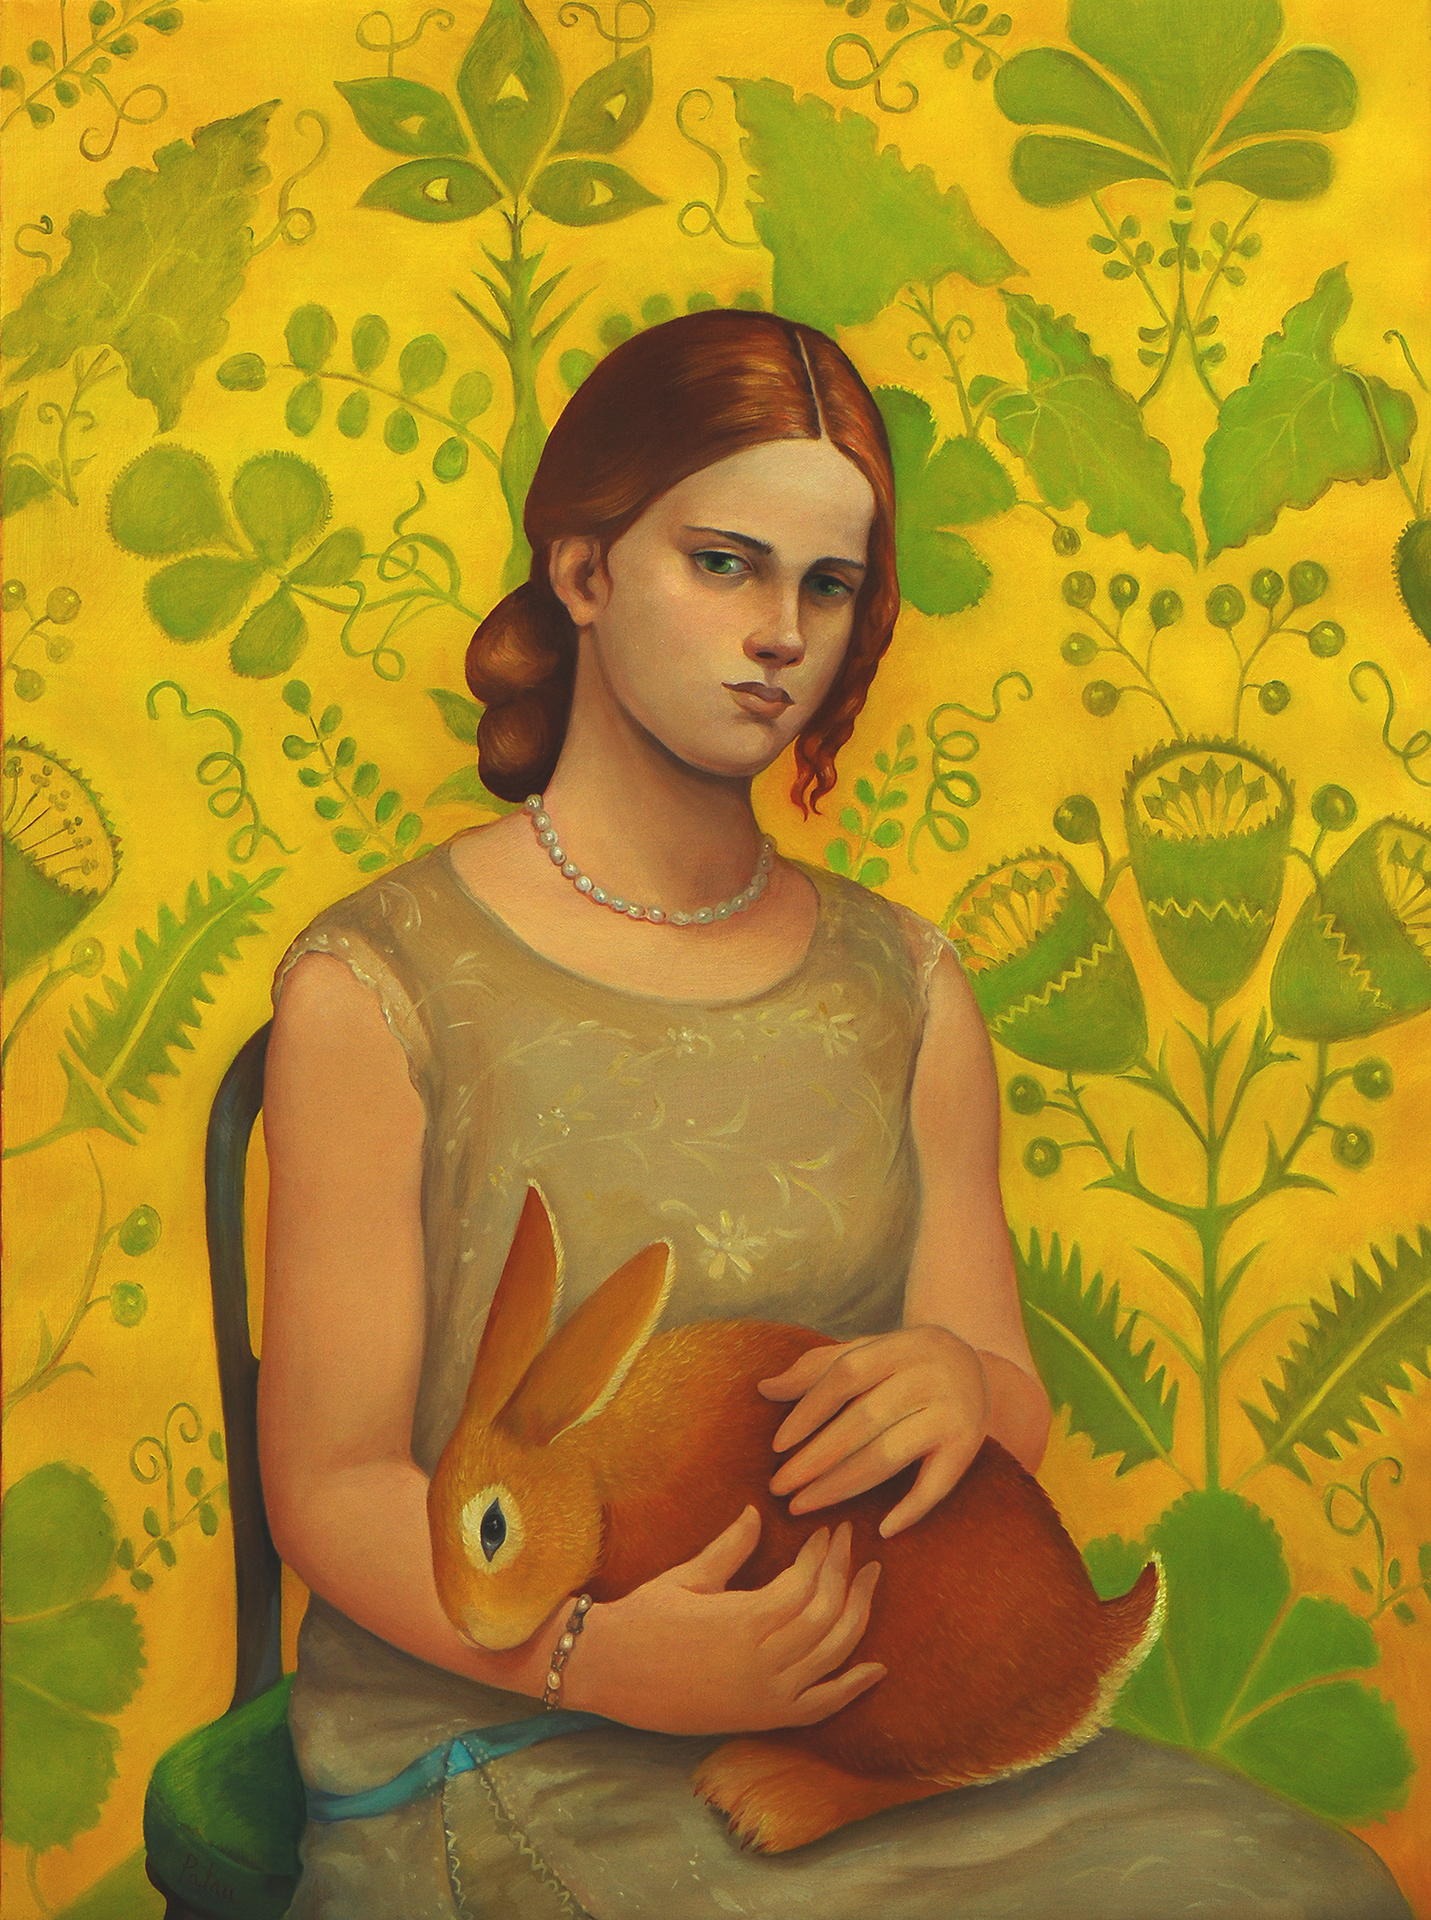 Young Girl with Rabbit, Fleur Palau - oil on canvas, 32 x 25